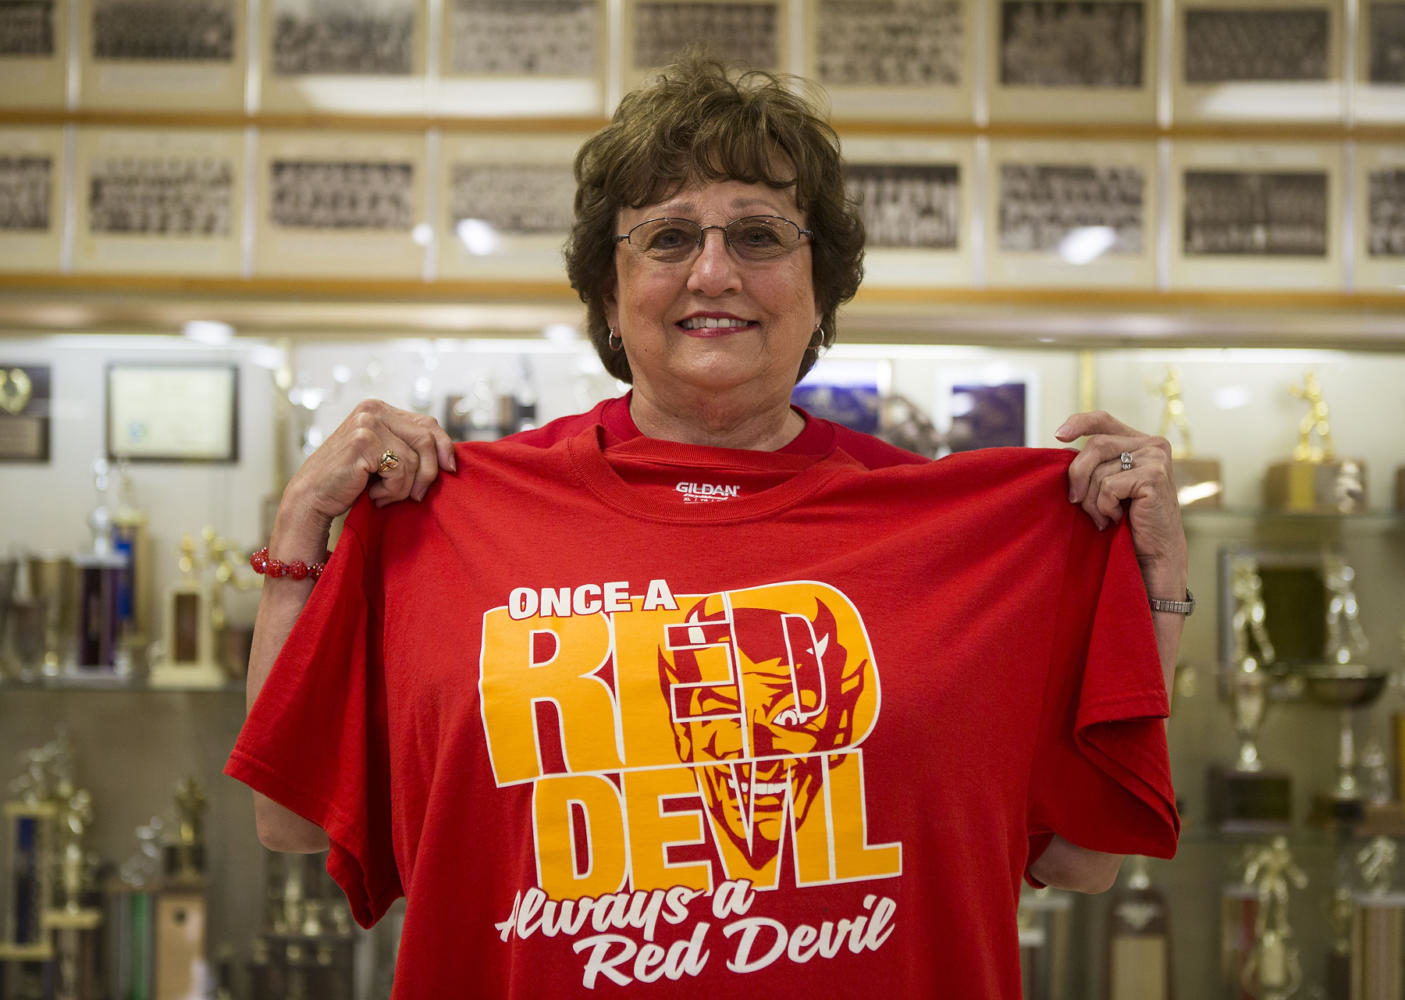 Jan Etherton, a long time superfan of the Murphysboro Red Devils shows off her t-shirt prior to the 100th meeting between the Red Devils and the Carbondale Terriers on Friday, Aug. 25, 2017, at Doc Bencini Field, in Murphysboro, Illinois. Well, I think the thing that tells my story is this, said Etherton as she lifted the shirt. This is my shirt that Im going to be buried in.  (Ryan Michalesko | @photosbylesko)